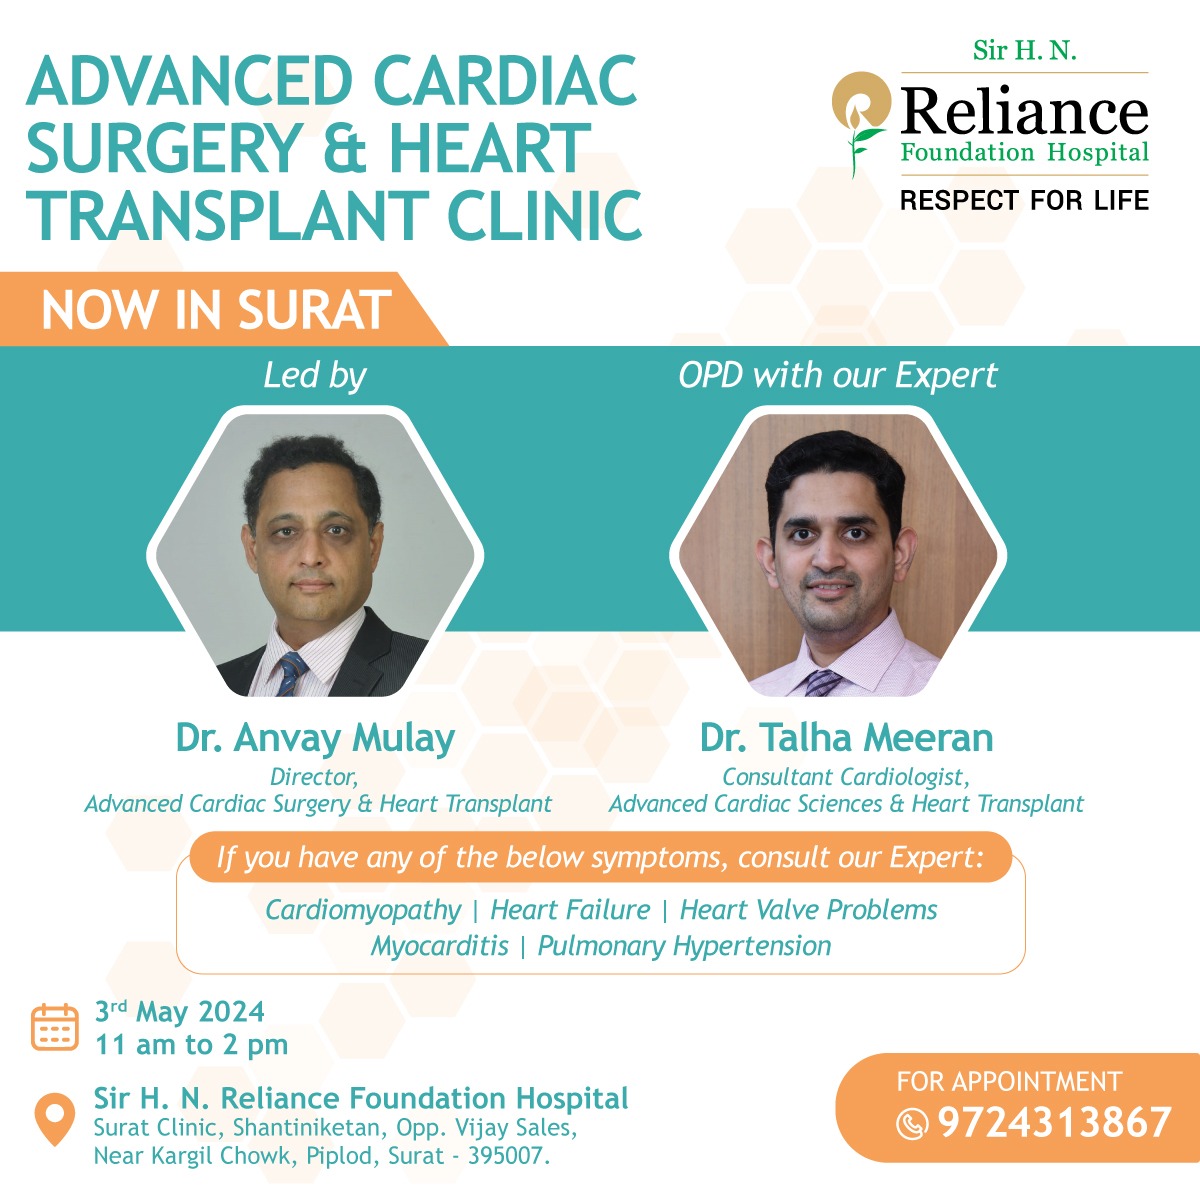 Meet our Experts! Sir H. N. Reliance Foundation Hospital is organizing the Advanced Cardiac Surgery & Heart Transplant Clinic in Surat on 3rd May 2024 from 11 a.m. to 2 p.m. To book an appointment, call on 9724313867 #RelianceFoundationHospital #RespectForLife #HeartTransplant